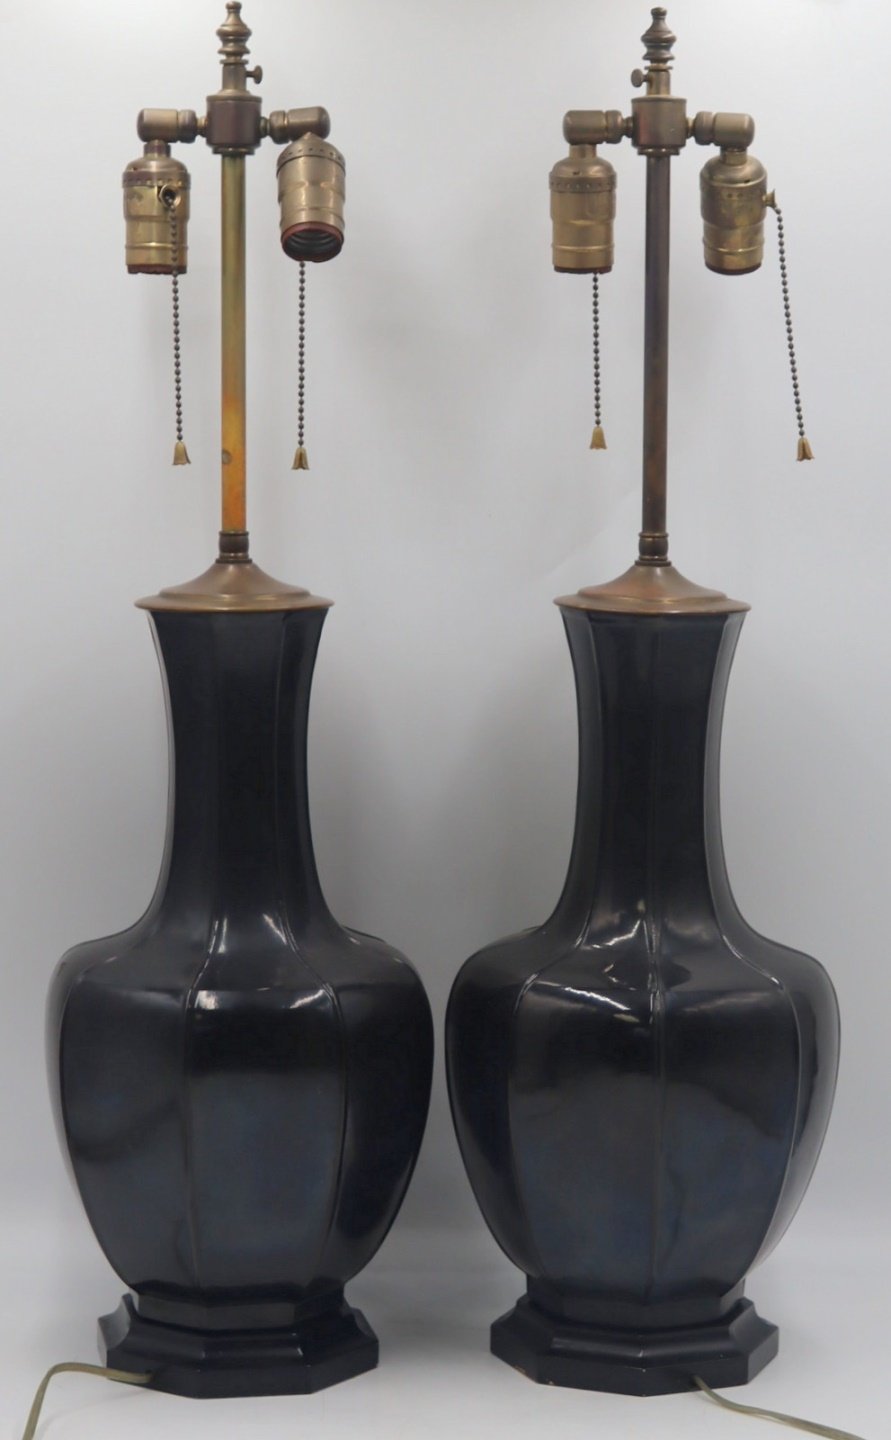 PAIR OF ASIAN STYLE BLACK LOBED